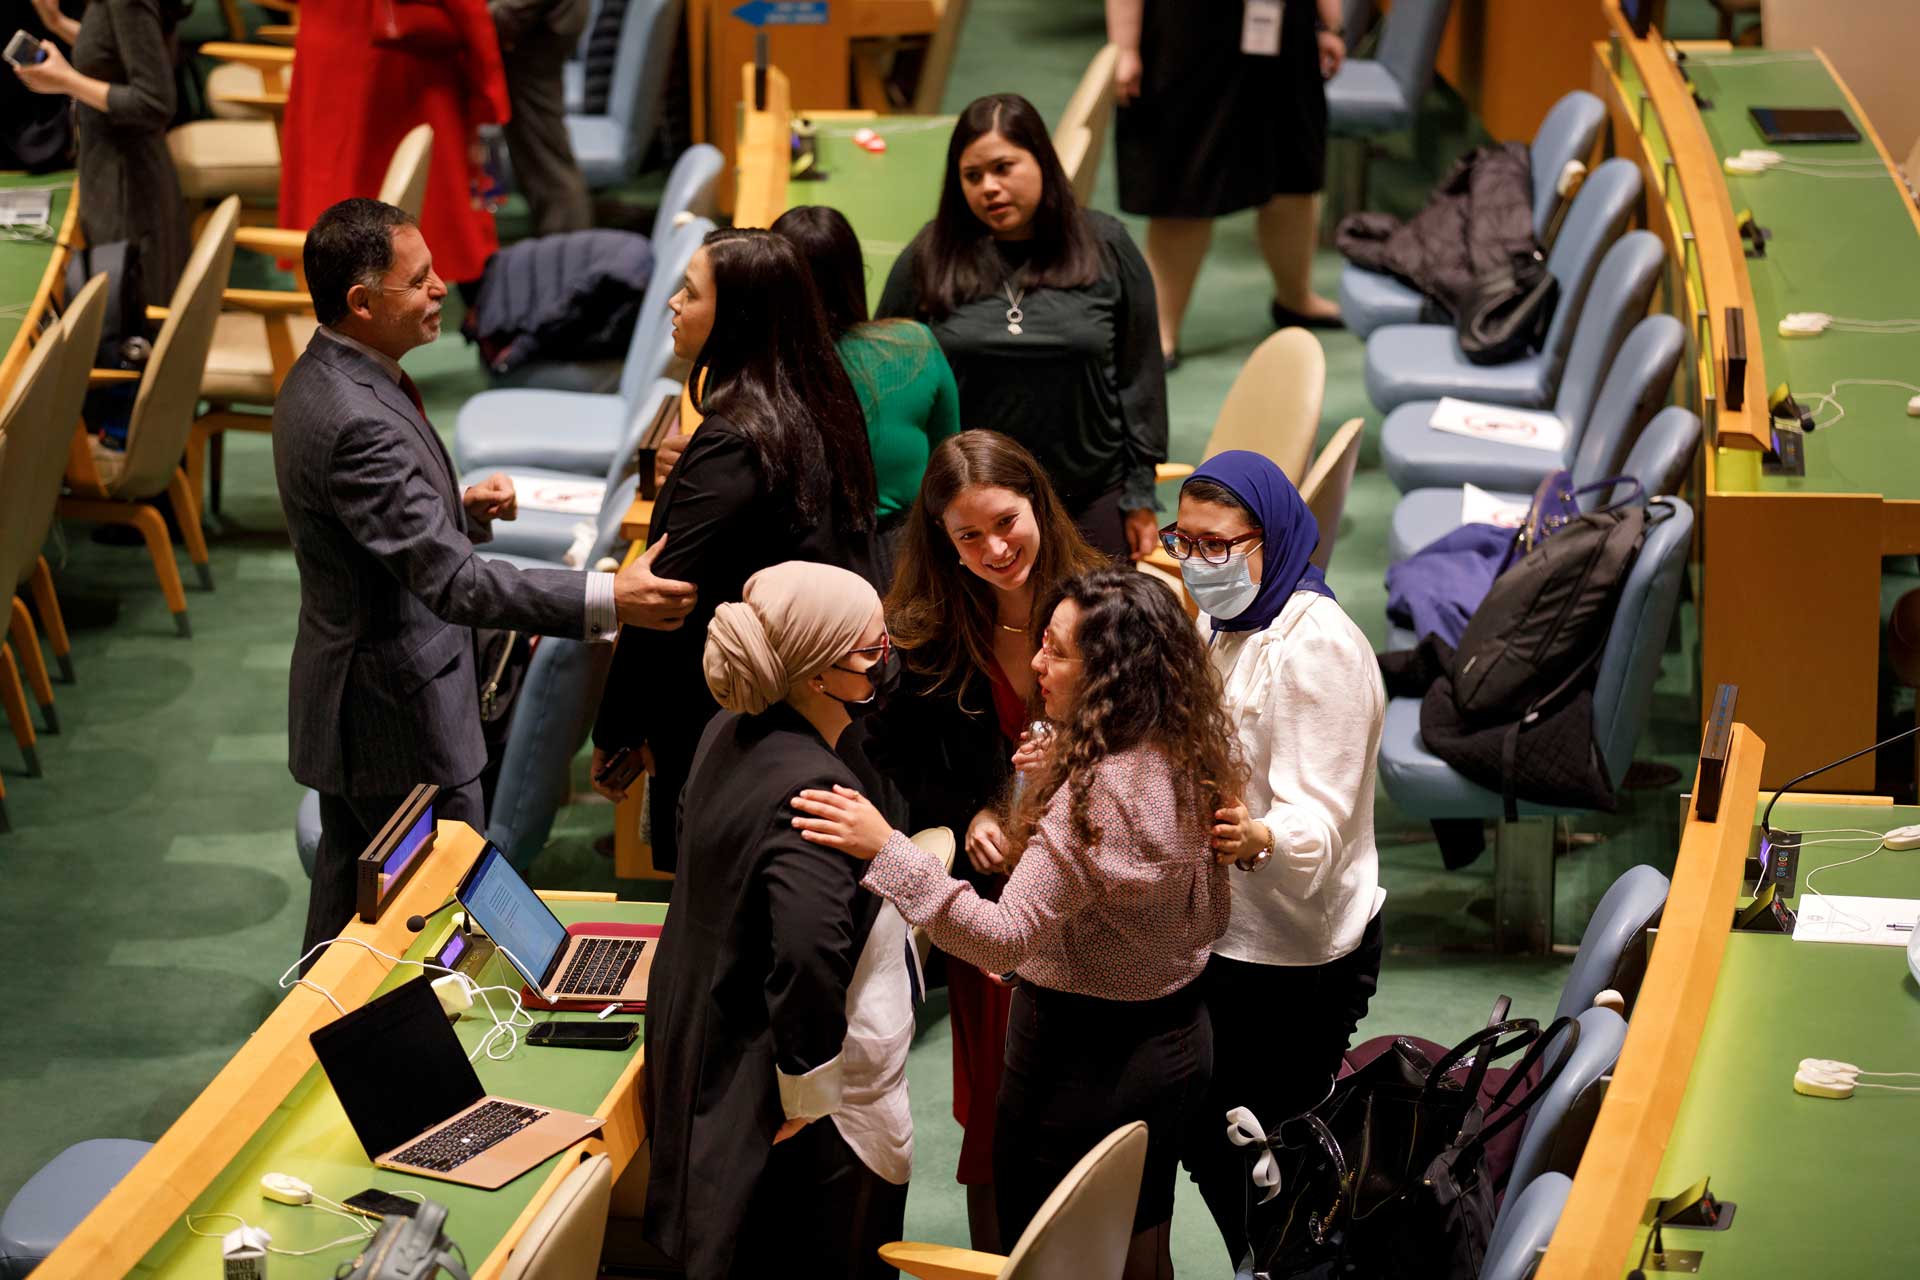 Scenes from the closing of the 66th session of the Commission on the Status of Women on 25 March 2022